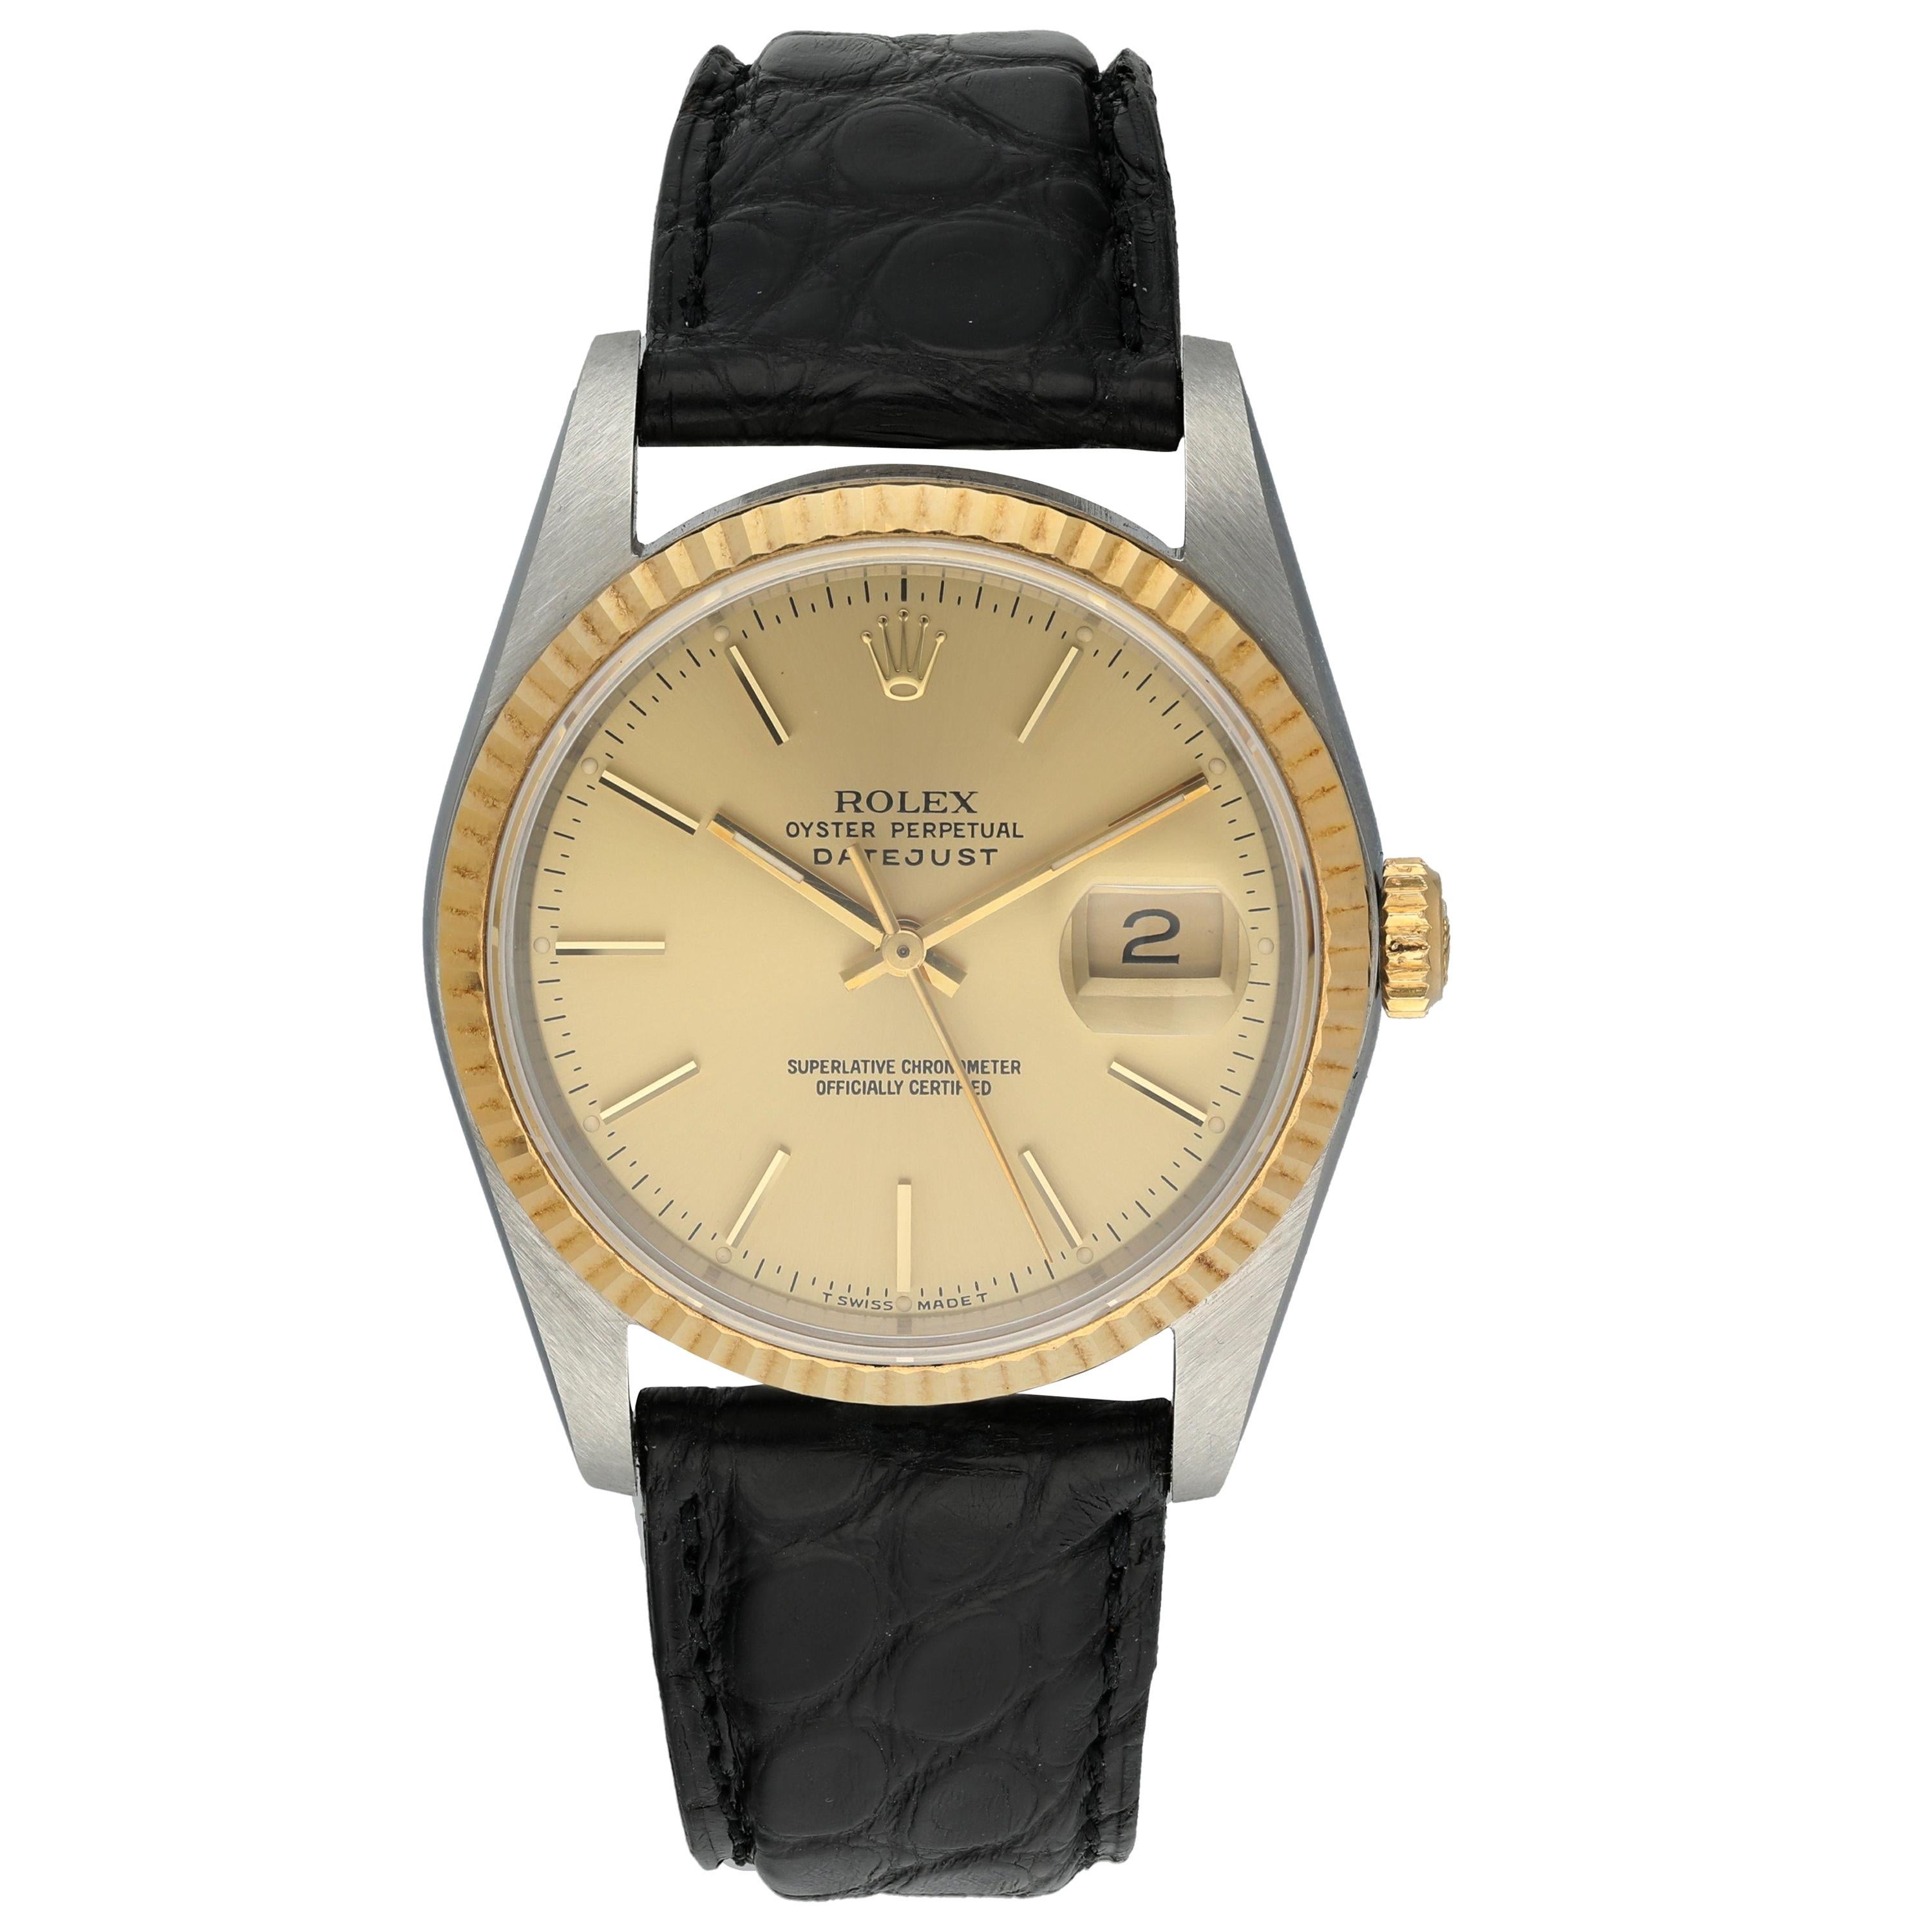 Rolex Oyster Perpetual Datejust 16233 Men's Watch For Sale